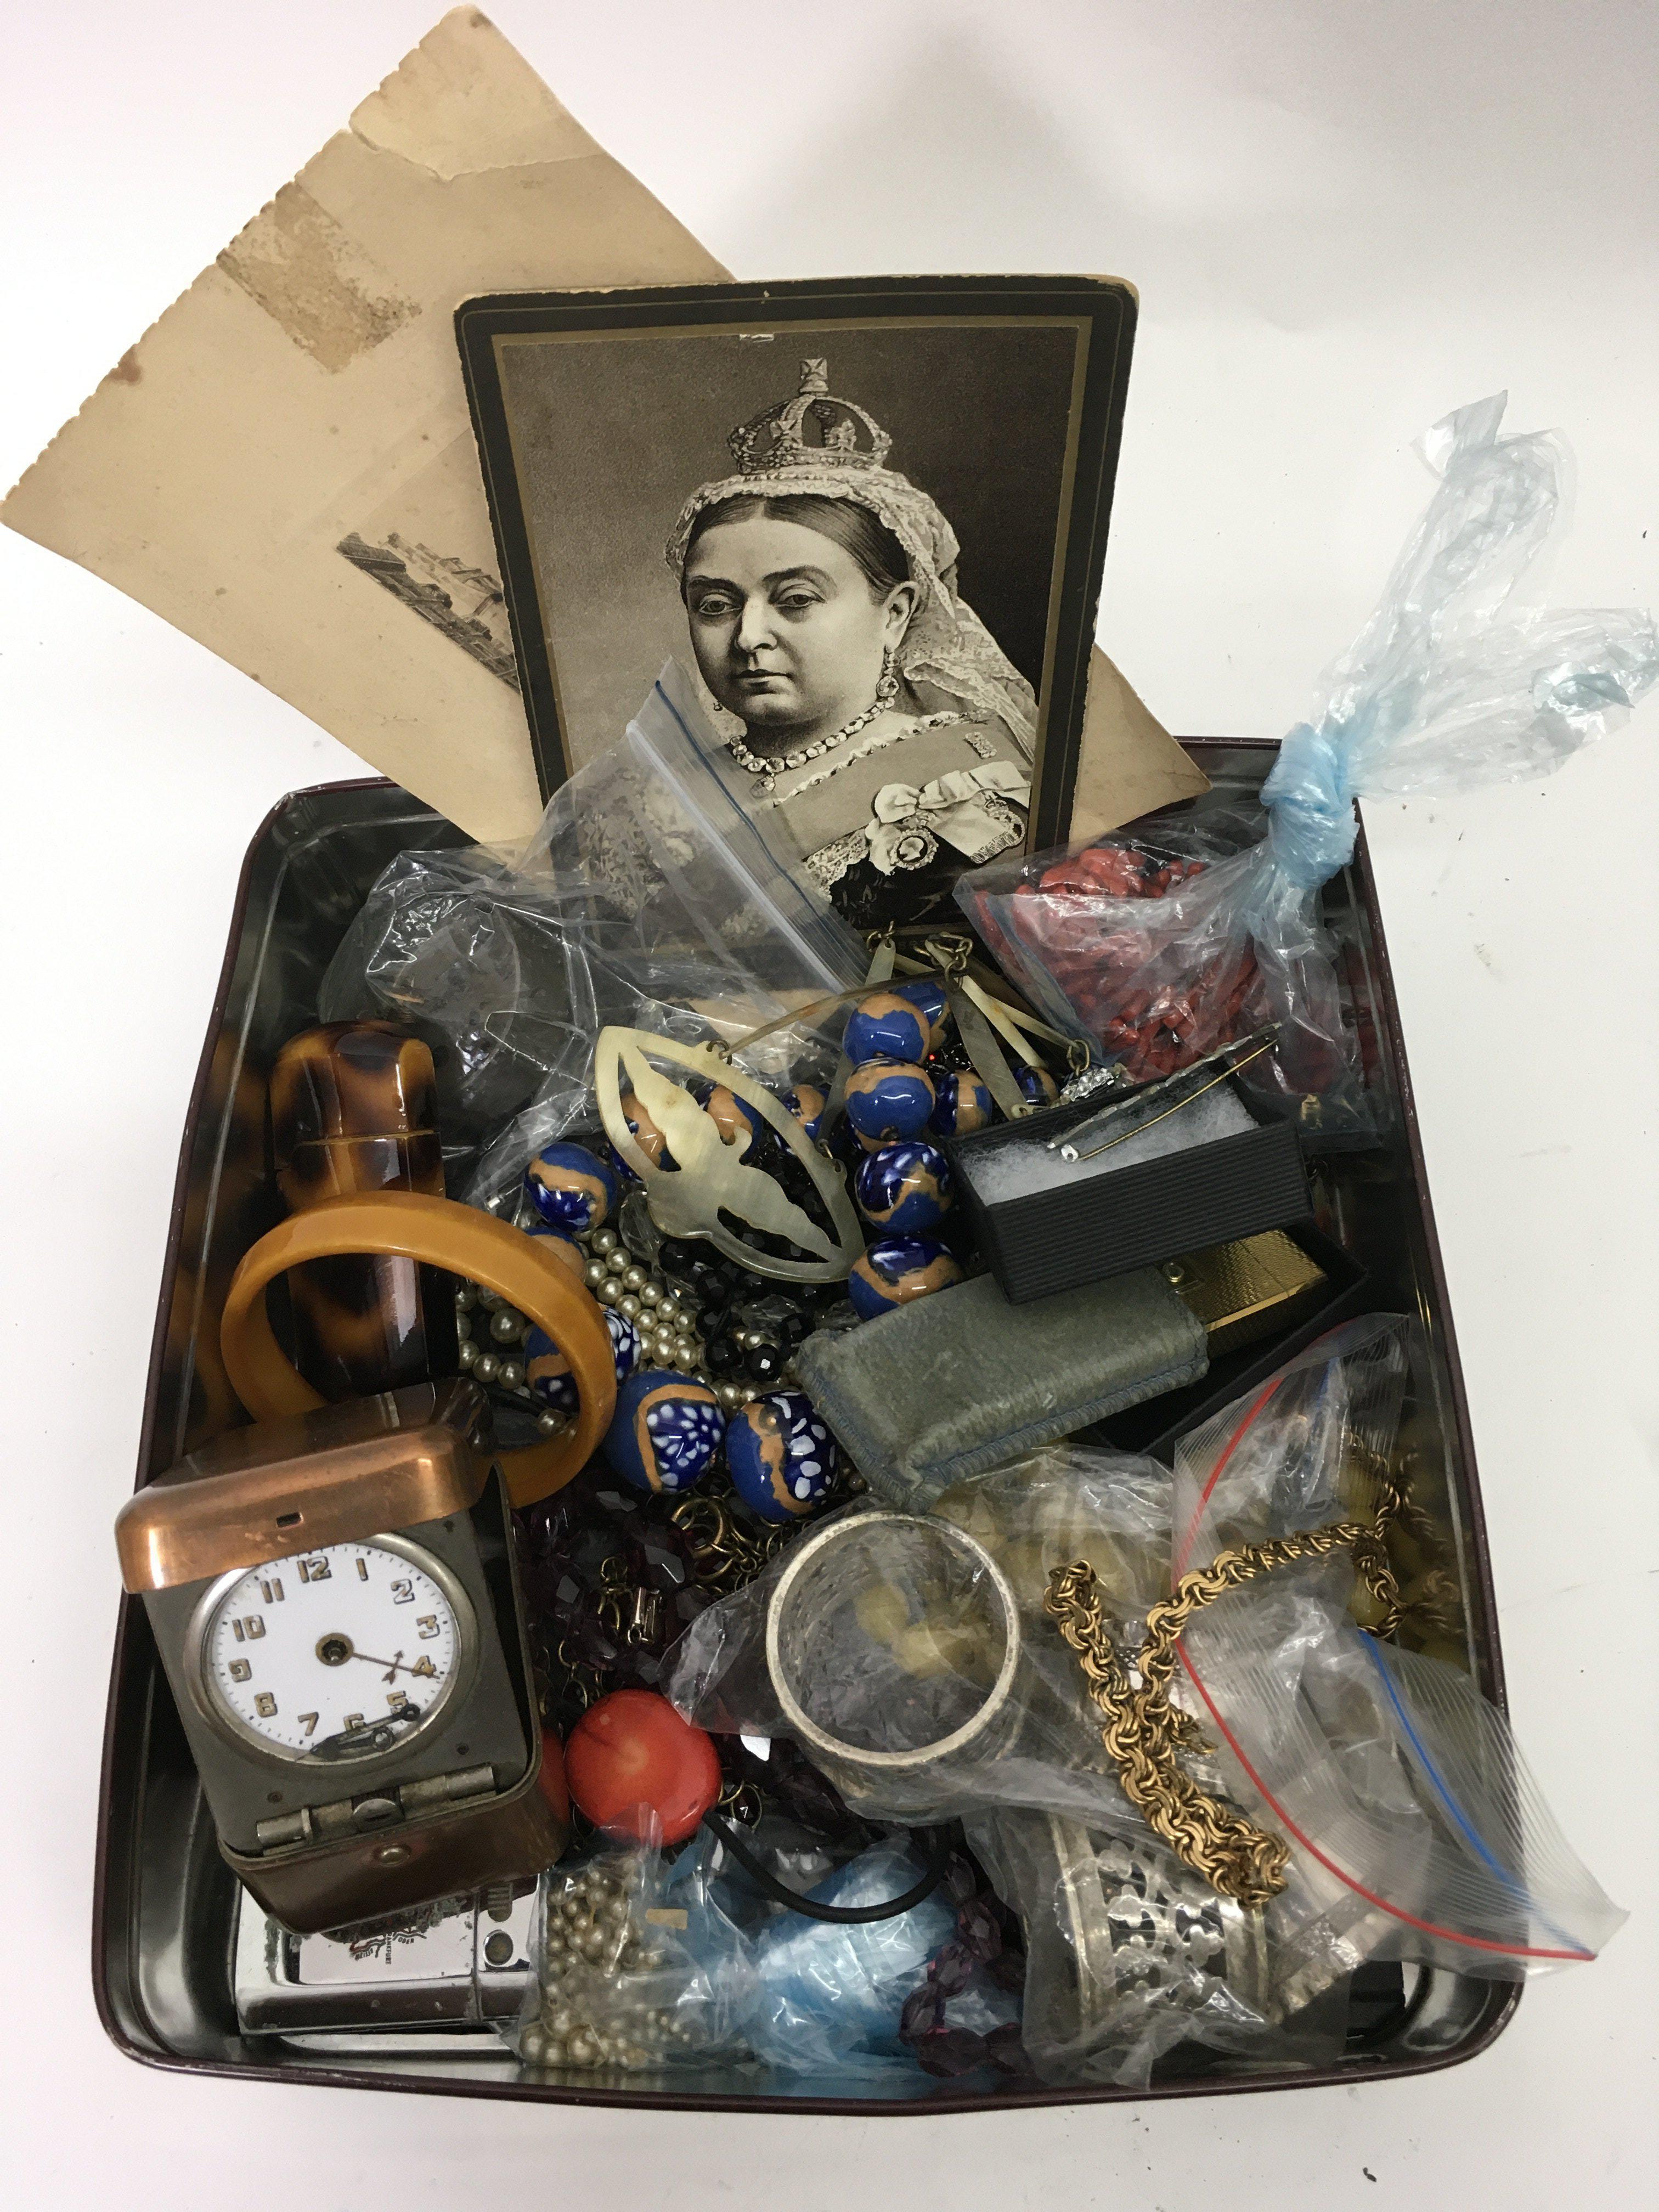 A tin containing costume jewellery and odds - NO R